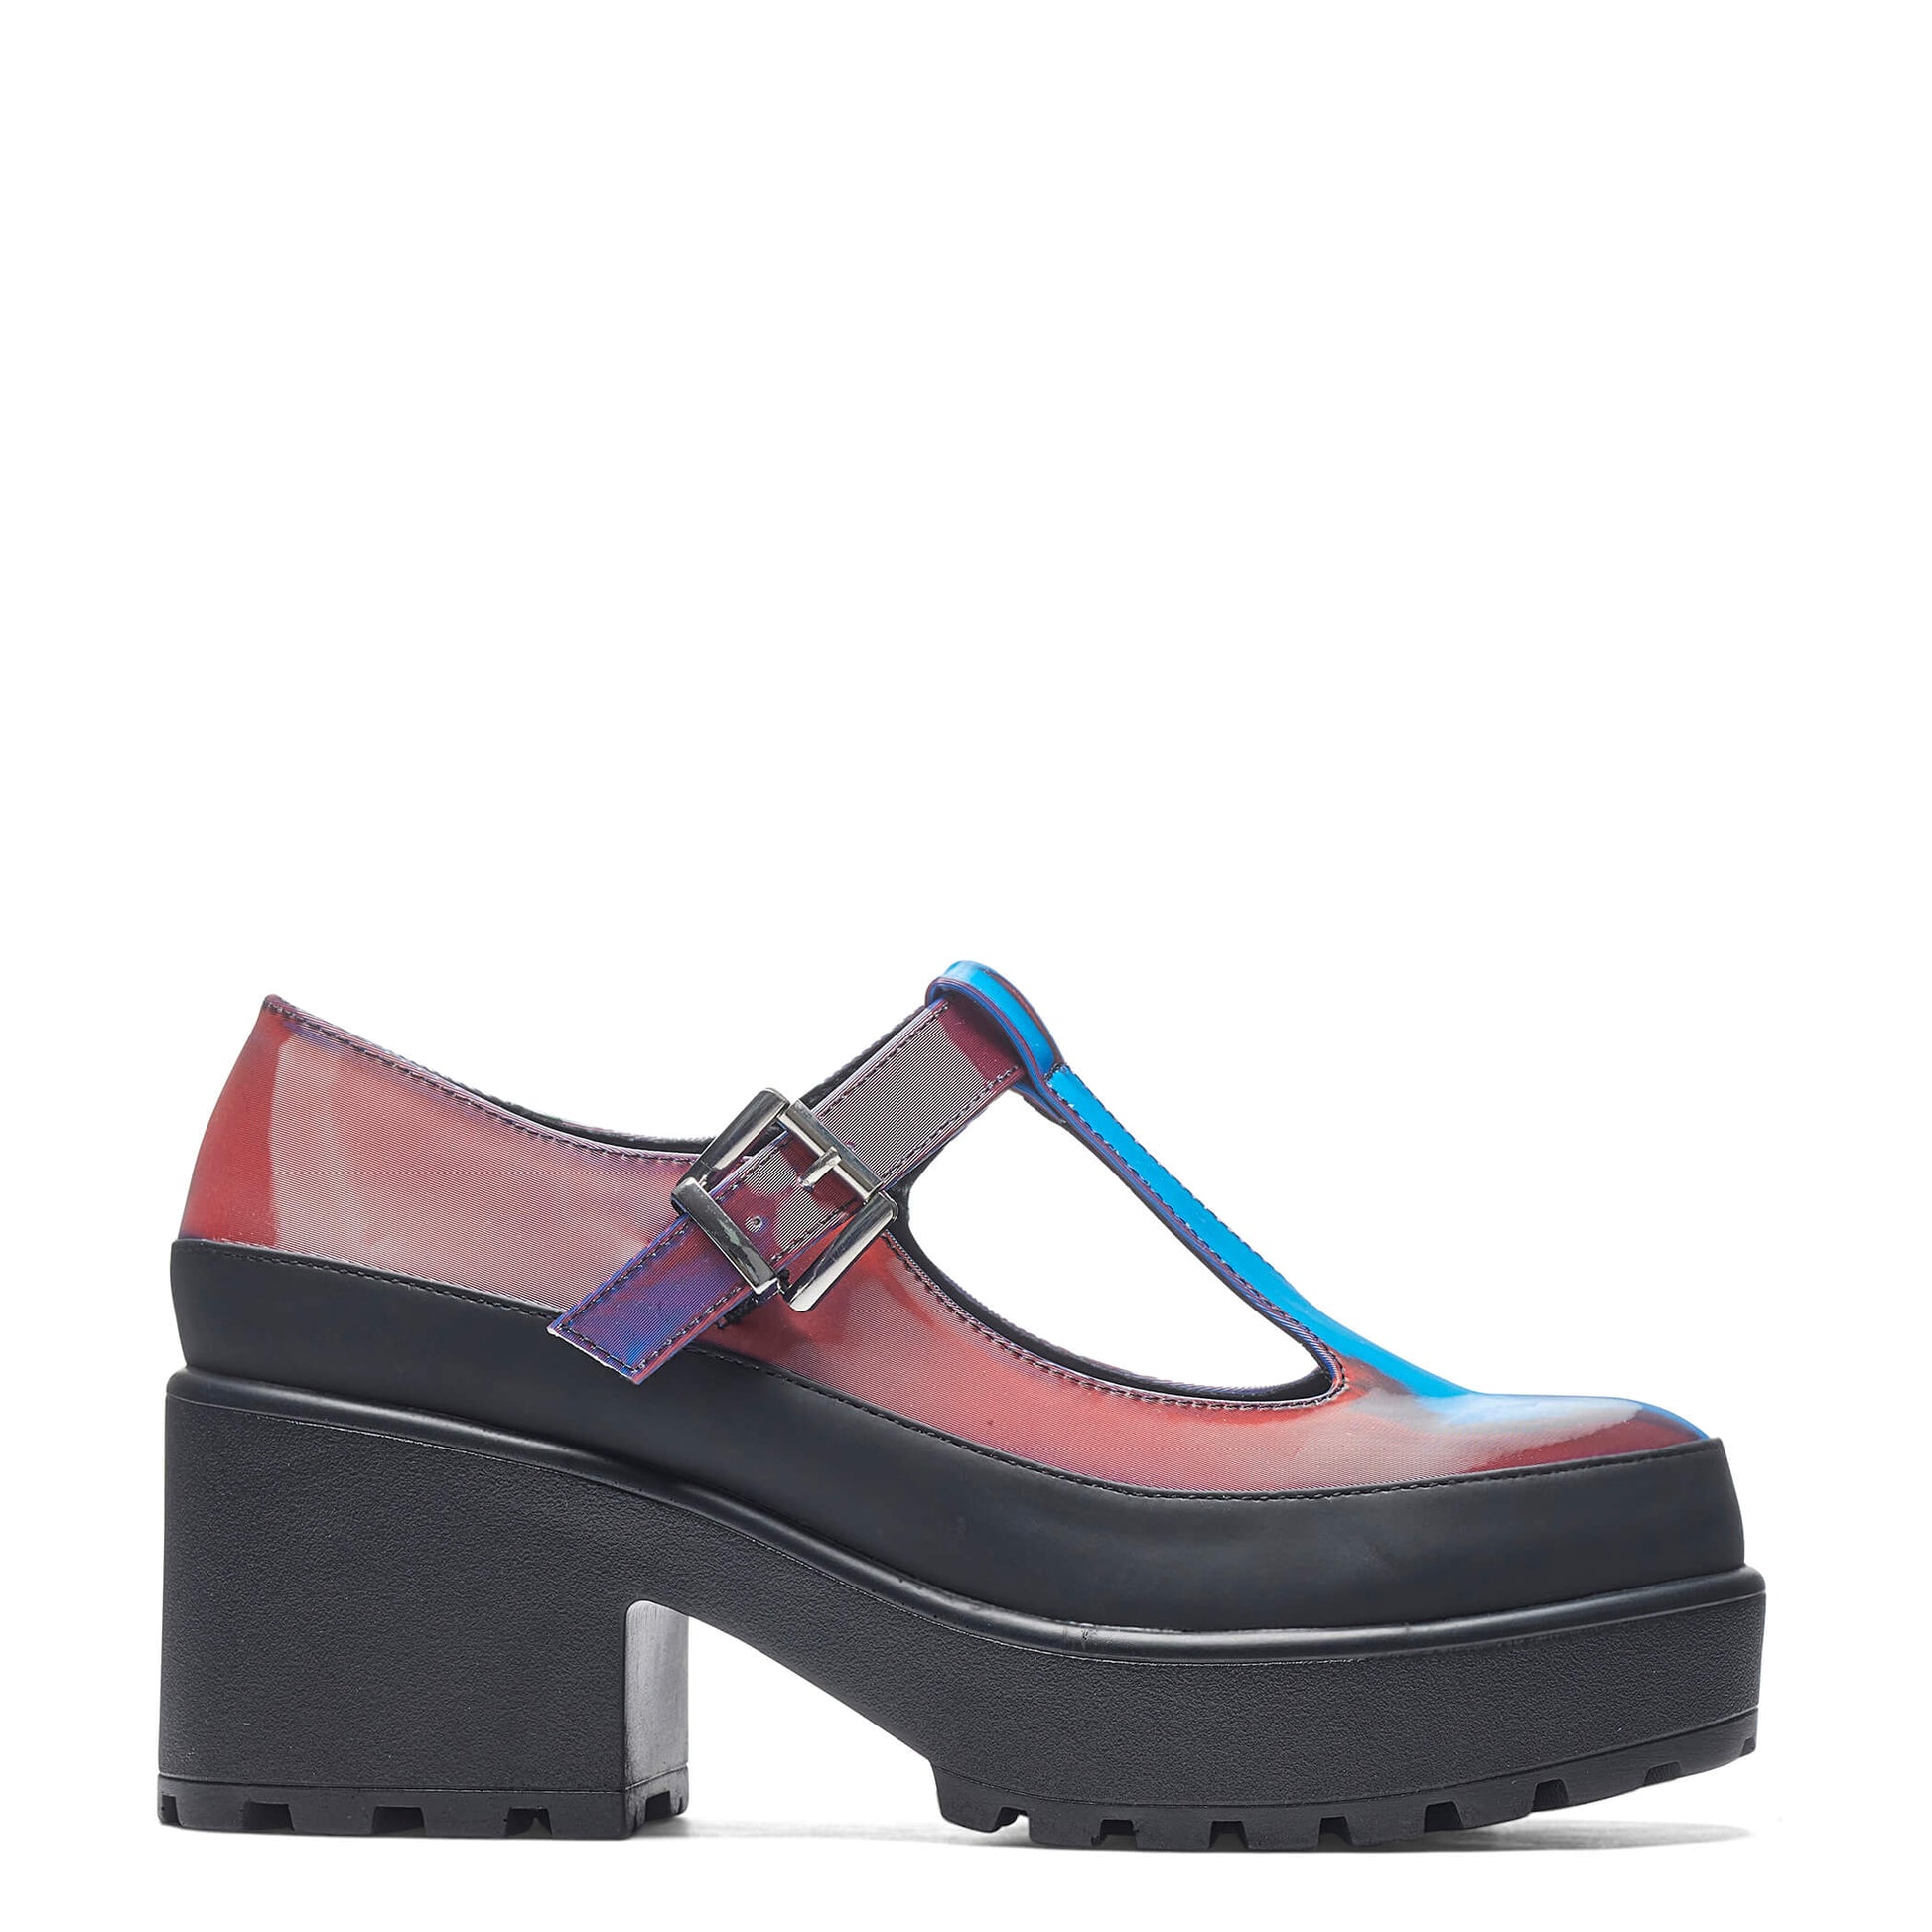 Sai Iridescent Mary Jane Shoes 'Soap Bubbles Edition' - Multi - KOI Footwear - Side View